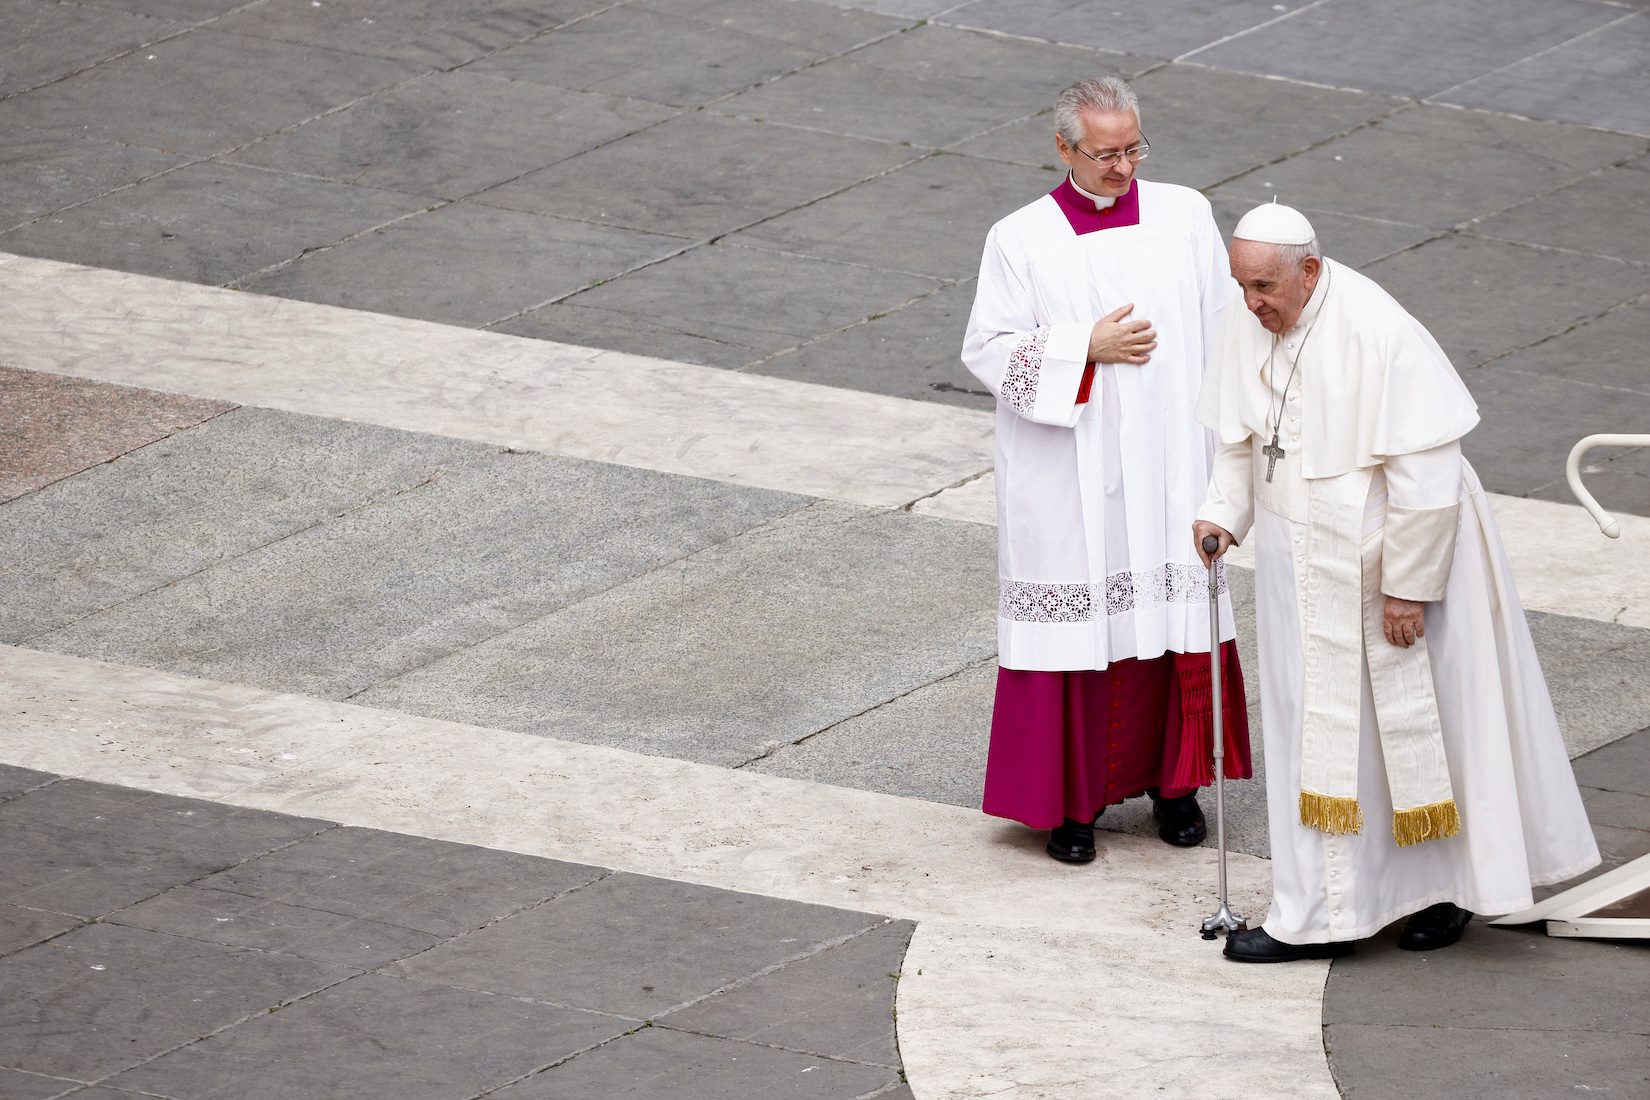 On Second Vatican Council anniversary, Pope Francis urges Catholic unity